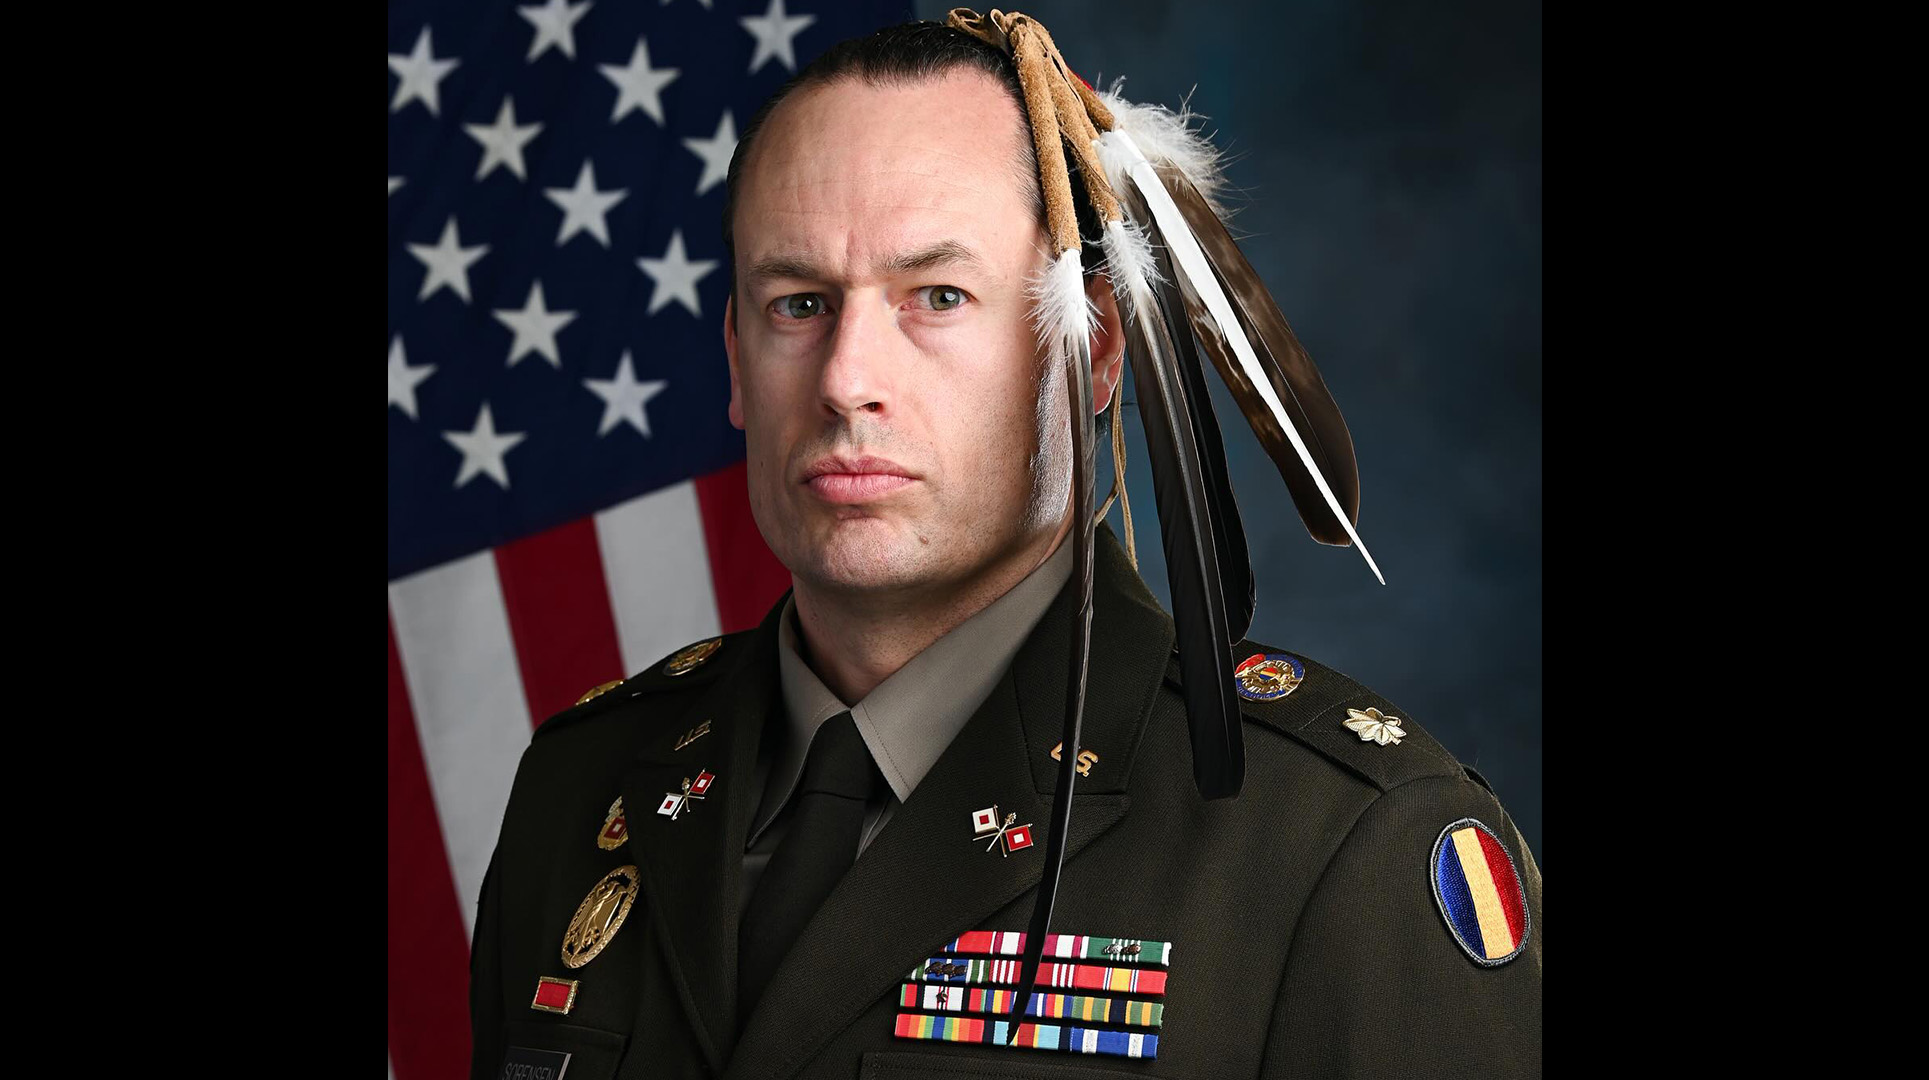 Army major honors fallen soldiers with Native eagle feathers in hair